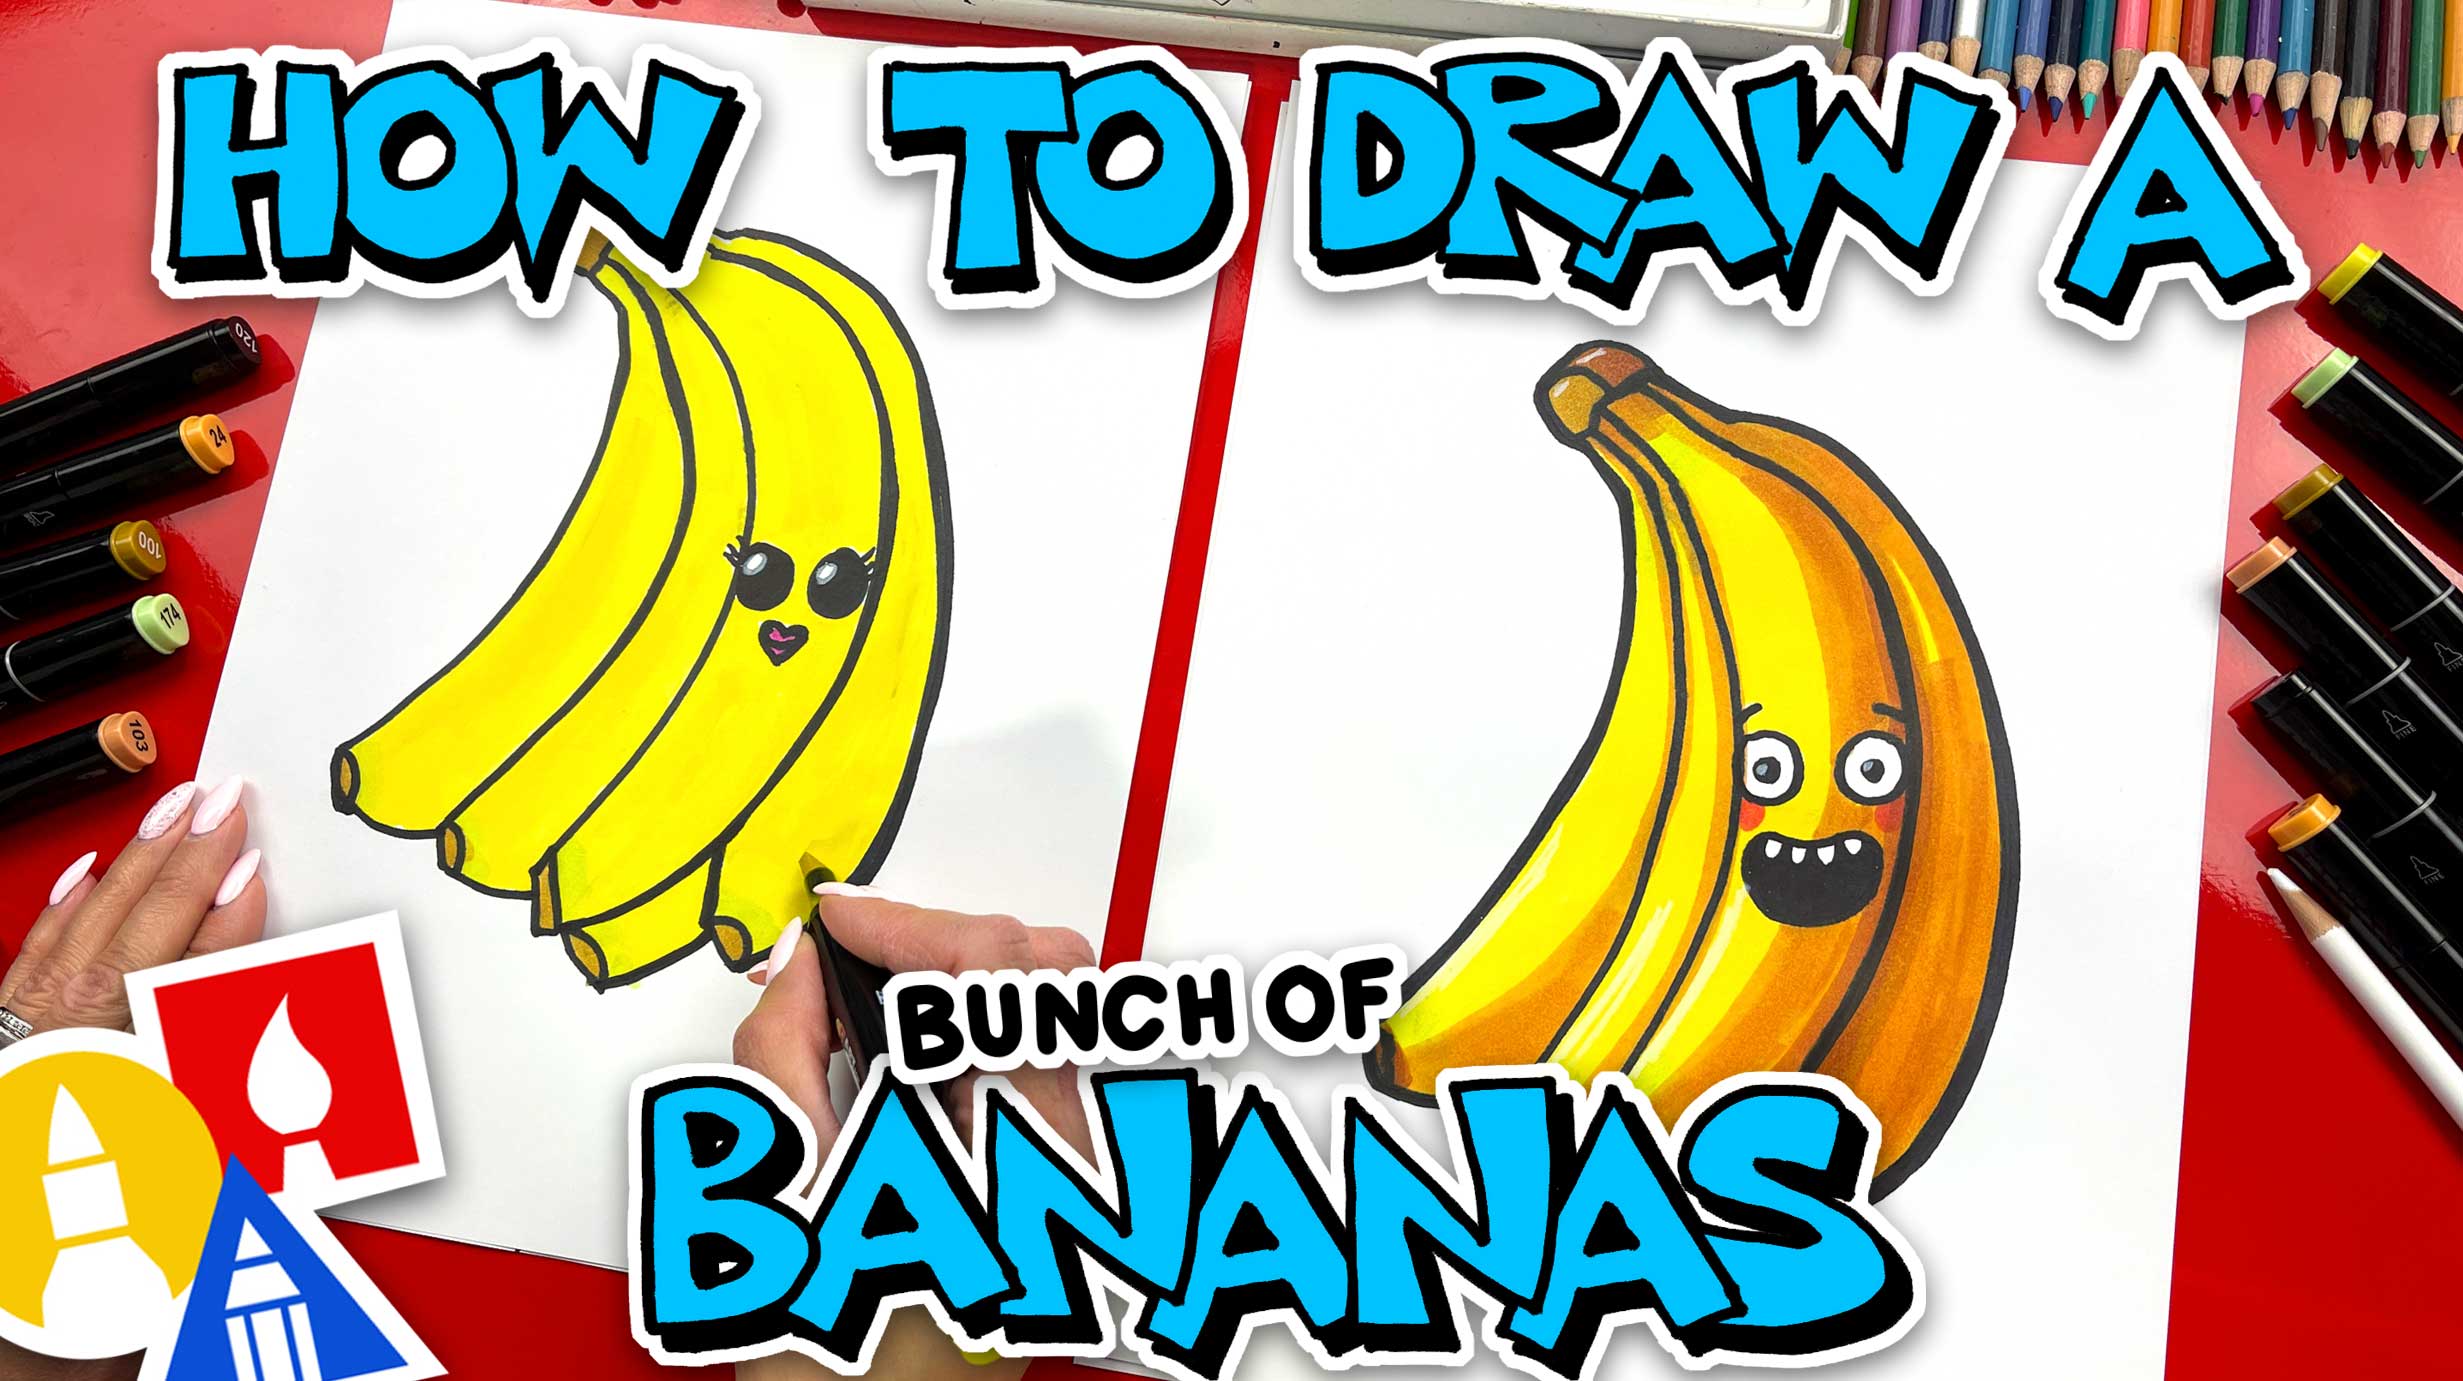 Drawing of Banana by lenny - Drawize Gallery!